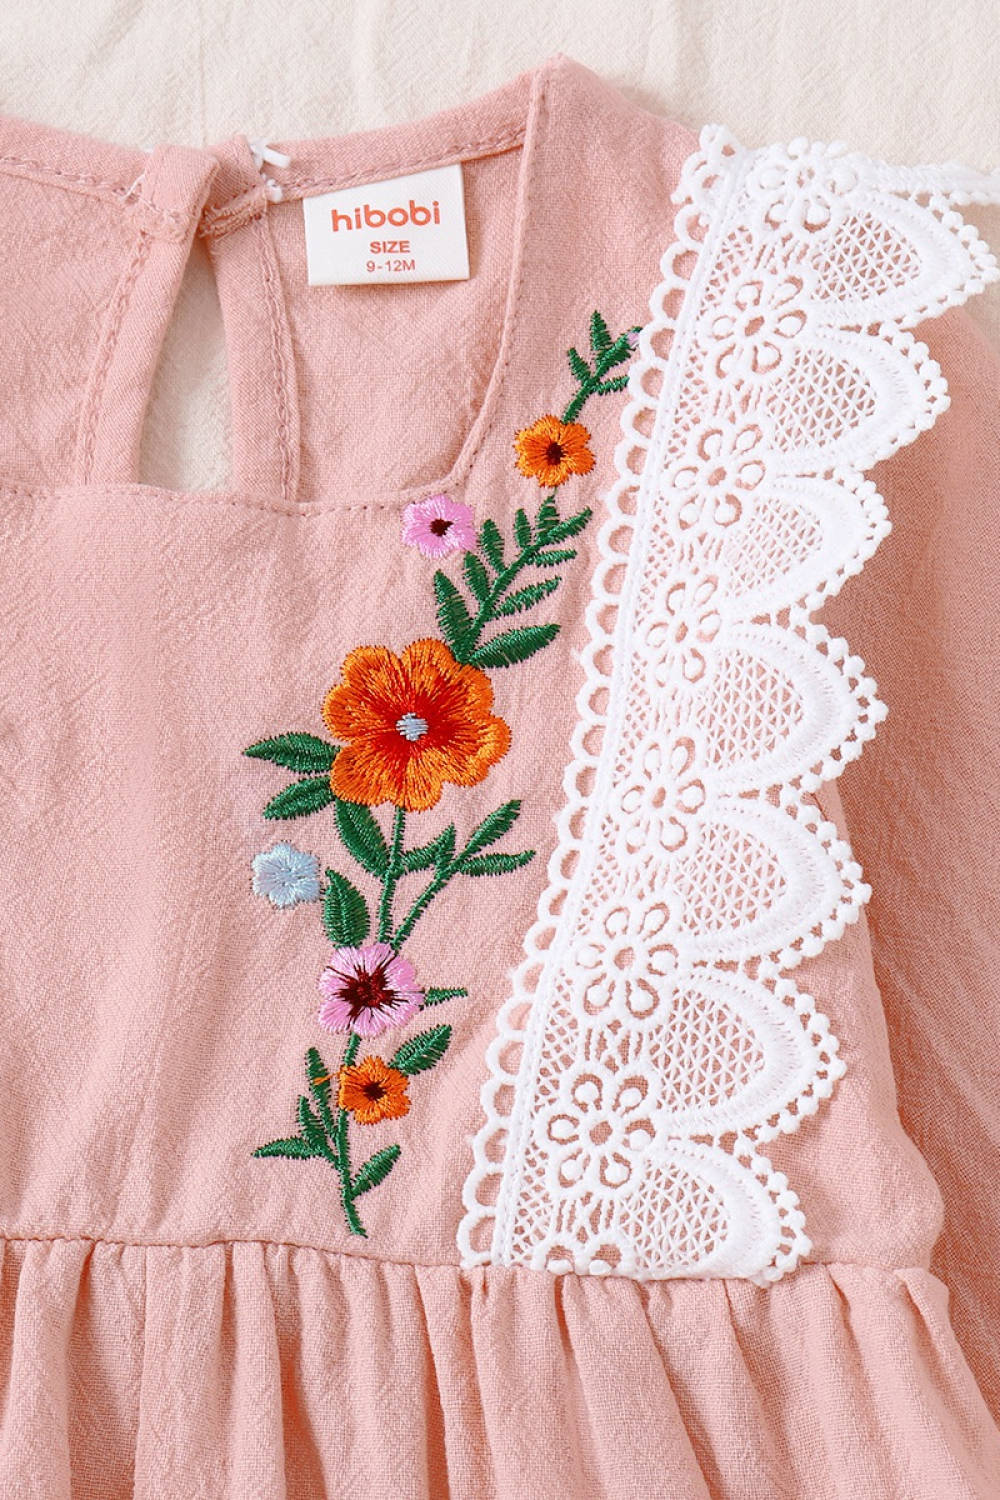 Girls Embroidered Lace Trim Dress